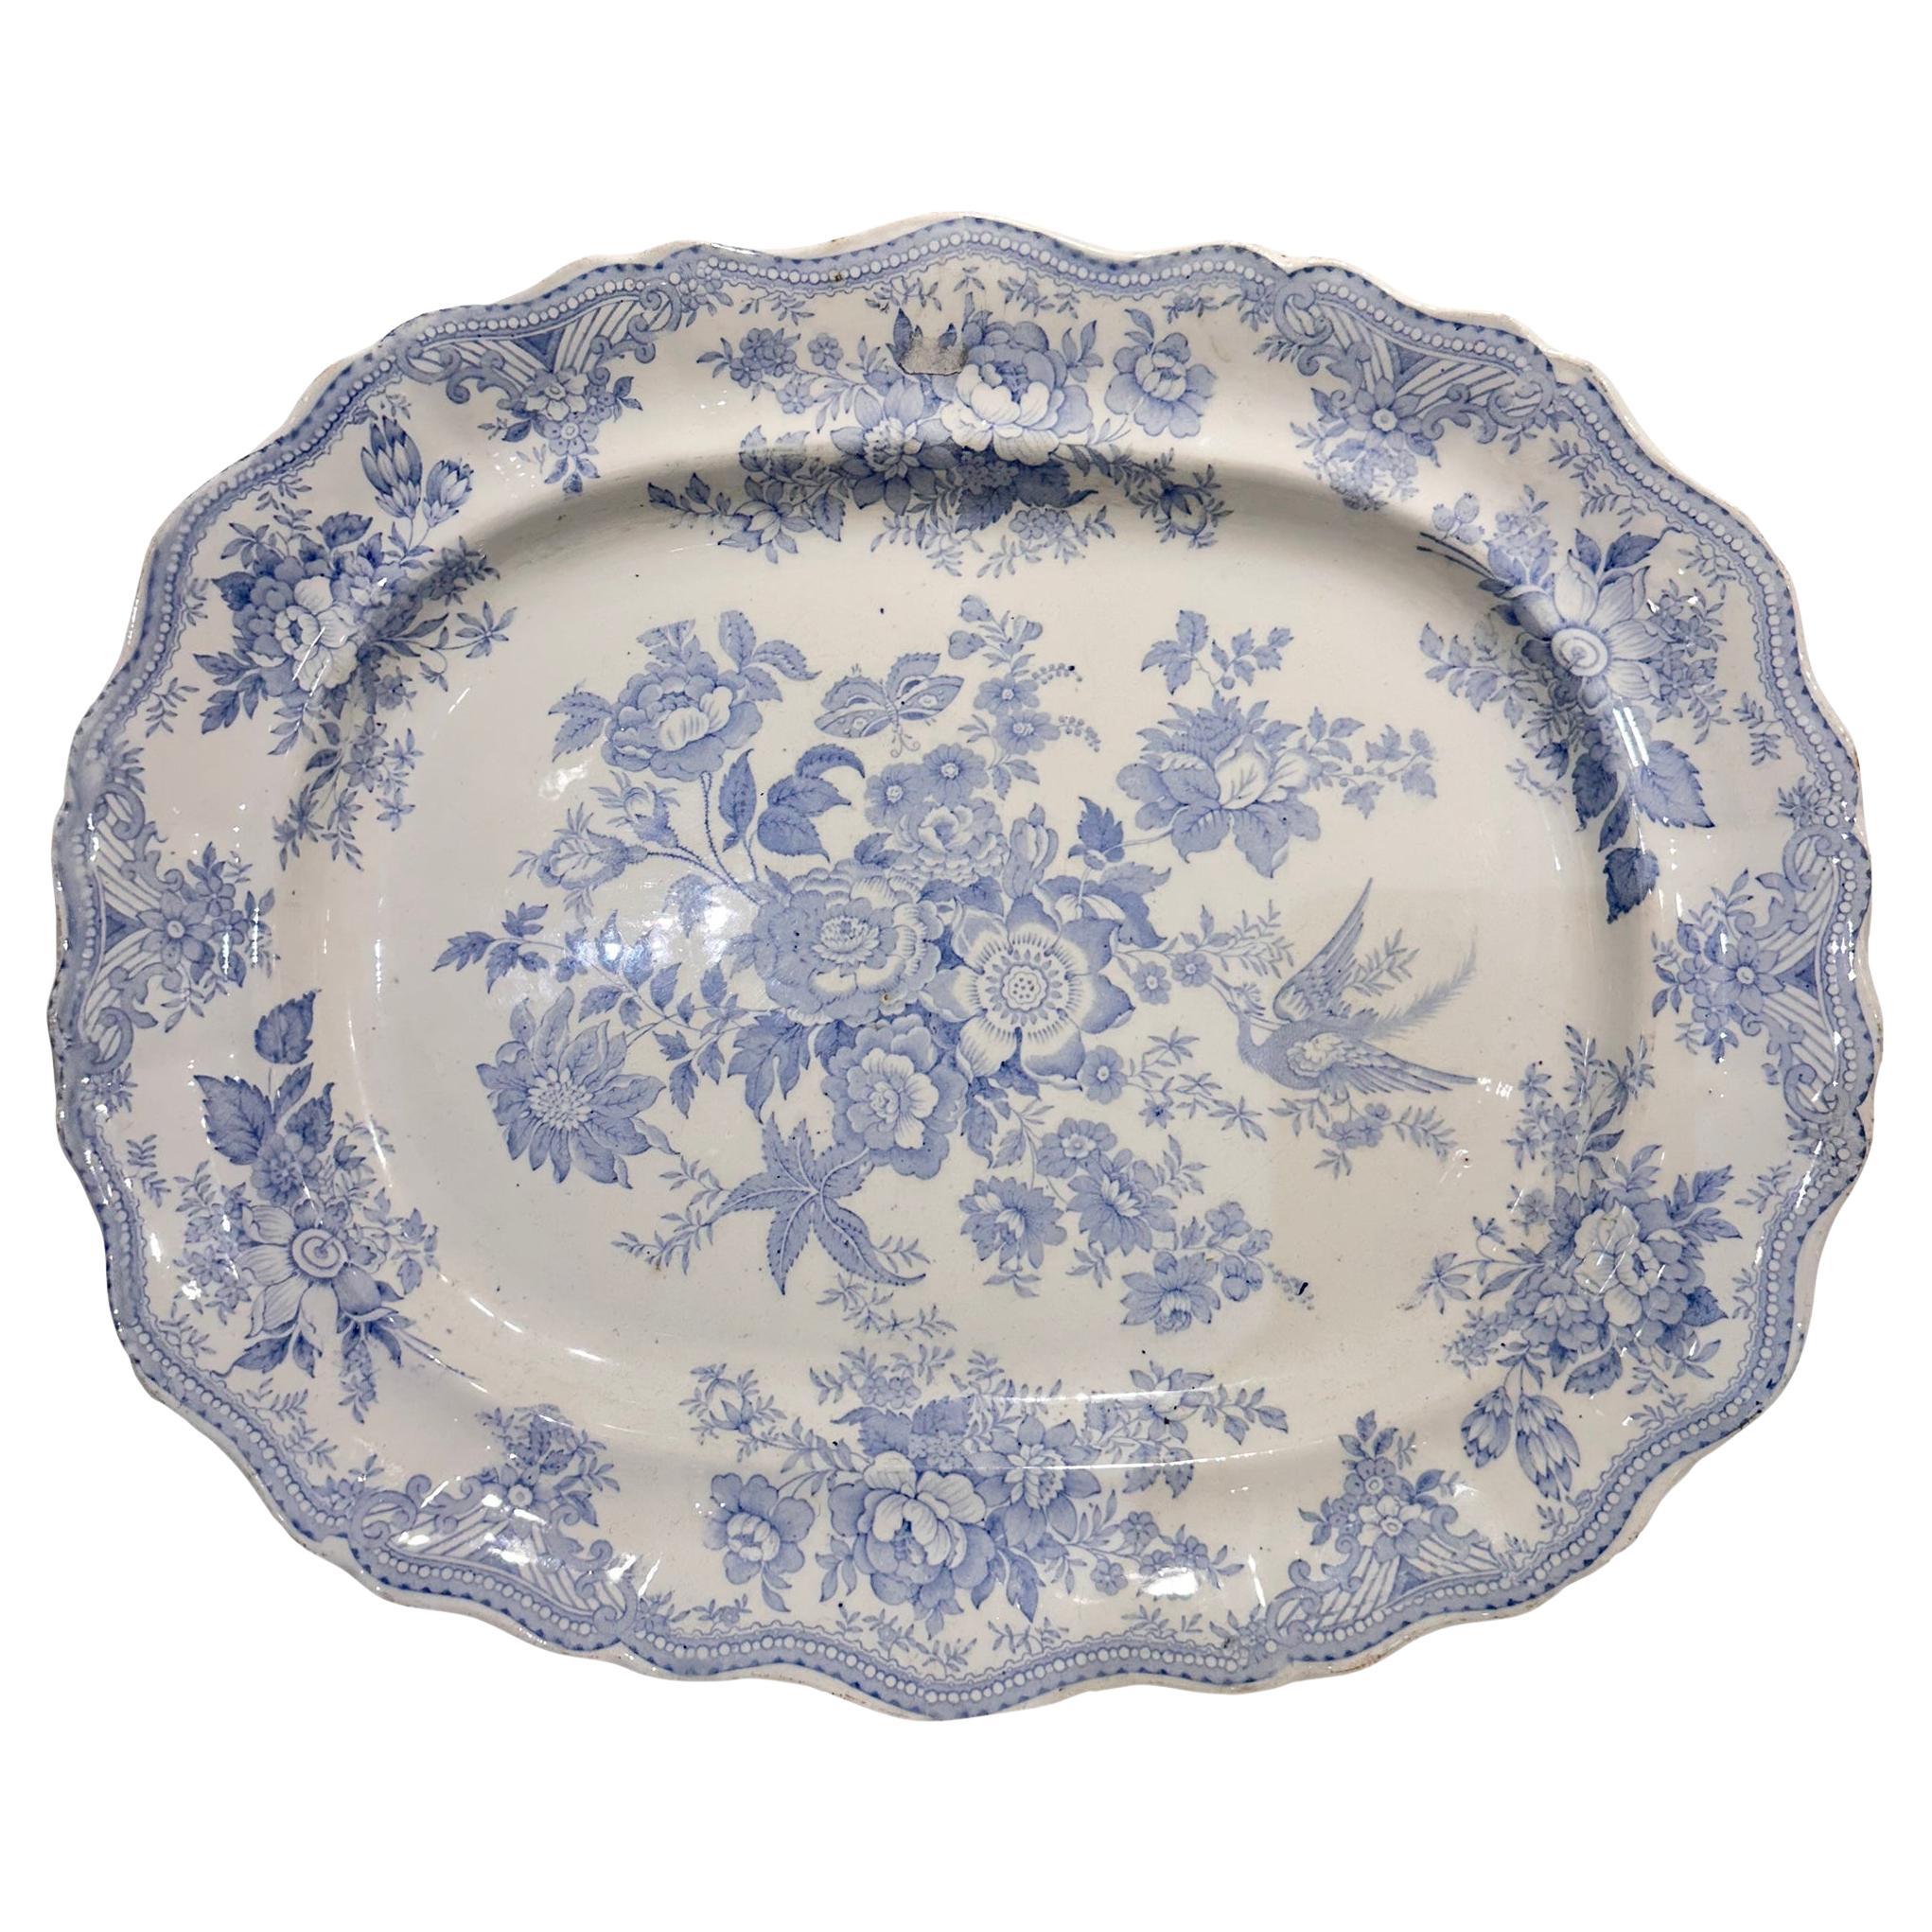 Blue and White Asiatic Pheasant Platter